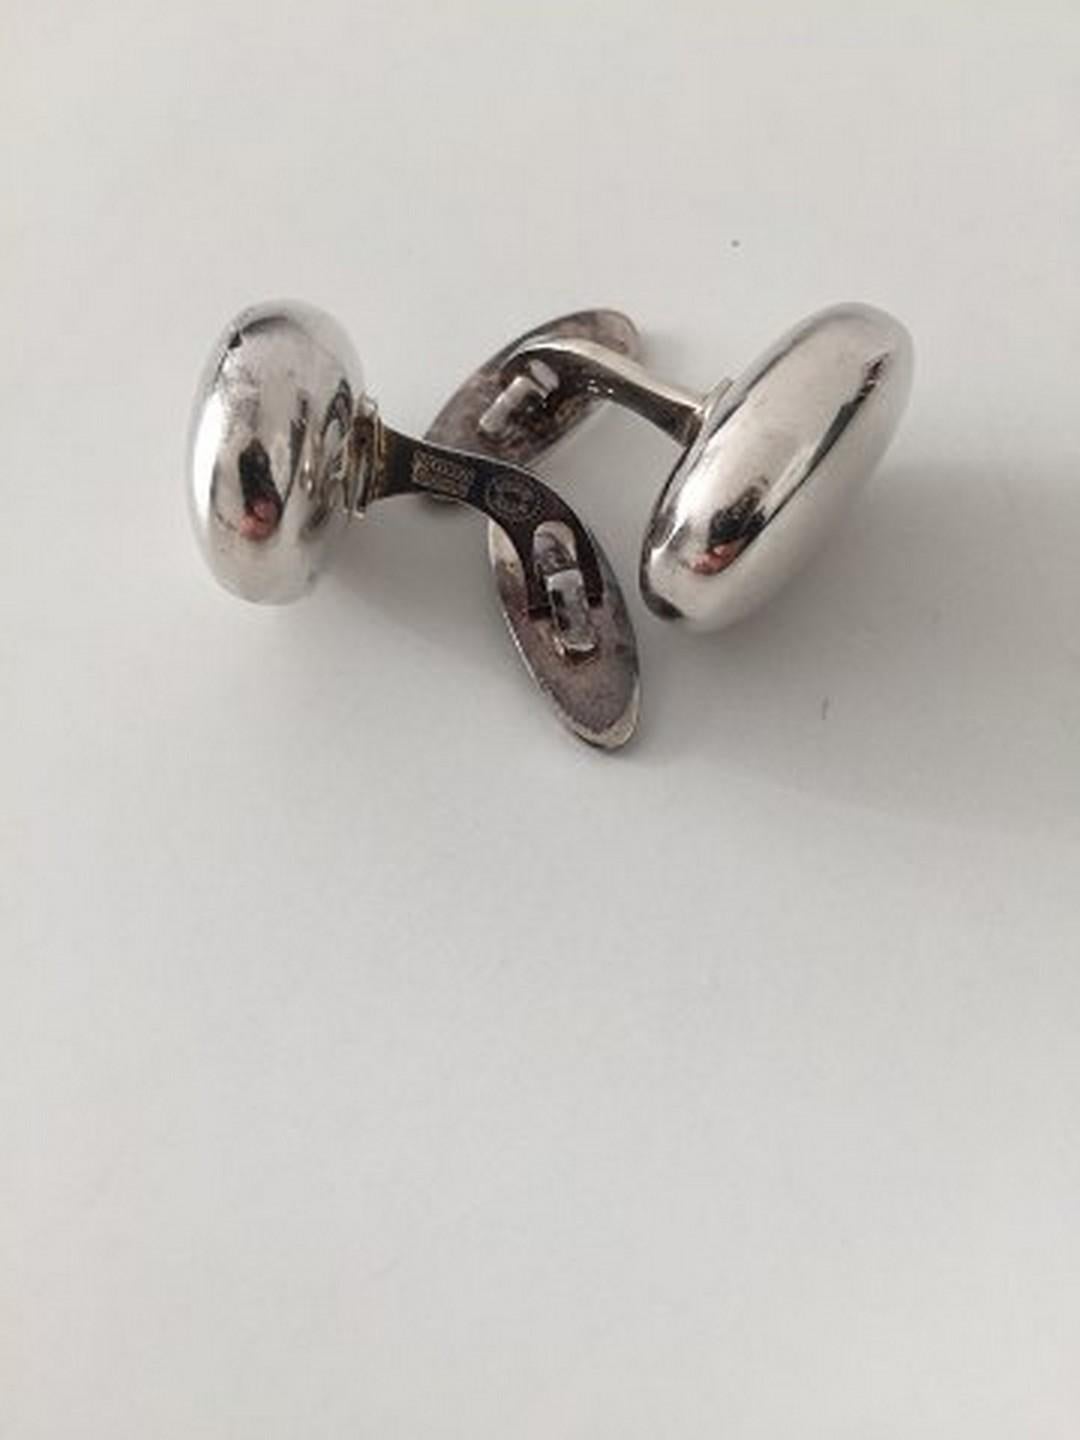 Georg Jensen Sterling Silver Cuff Links by Torun No 120. Measures 2.3 cm / 0 29/32 in. and is in good condition. Weighs 16.6 g / 0.58 oz.